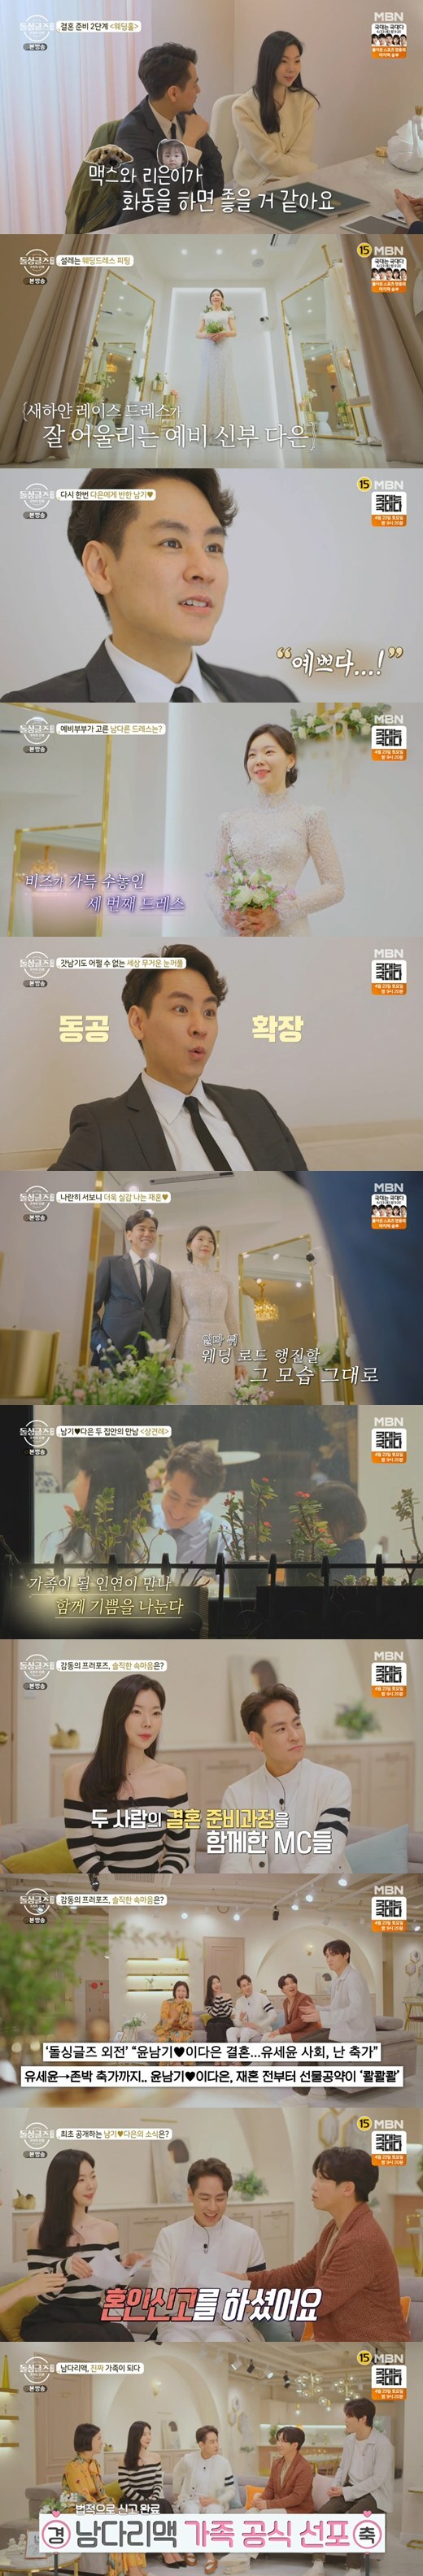 Yoon Nam-gi and Lee Da-eun completed the Marriage report and became the real Family.The last episode of MBN Dolsingles abduction - The Birth of Family (hereinafter referred to as dolsingles abduction) was broadcast on the 18th.Lee Da-eun was anxious all along after meeting Yoon Nam-gis Friend, who asked Lee Da-eun, Was it awkward for you two?Lee Da-eun said: He asked me one thing carefully: When is marriage going to happen? so I thought I could talk concretely after the meeting.Friend said that his brother said, Is not it a little quick? Yoon Nam-gi said, I did it? When did I tell you? Lee Da-eun added, Man also said that there is something fresh when they get married. Yoon Nam-gi said, Women are not even good at it.Yoon Nam-gi and Lee Da-eun headed to South Darland, where they sown up their love seven months ago.Lee Da-eun recalled the past and said, I have to continue to think that it is a hasty time at the time. We walked here then.I kissed him when he was walking. I was shaking. The feelings and feelings are different now.I am just so happy sitting here after a few months. Yoon Nam-gi was away for a while, and Lee Da-eun remained alone and waited for Yun Nam-gi, when he heard the voice of Daeun-ah with the video playback: Yun Nam-gi prepared a surprise proposal.Yoon Nam-gi said, There were more mountains to overcome in the remarriage, children, dogs, and places to live, but I was very confident and confident when I went over together.We will continue to live happier in Family. As Father, the best thing we can do to our children is to love our mother.I will try to be a good father to Lee, I love you. After the video, Yoon Nam-gi appeared and presented him with a bouquet of flowers; he took out a proposal ring and put it in Lee Da-euns hand; Lee Da-eun wept.Yoon Nam-gi confessed to Lee Da-eun, Lets get married. Lee Da-eun smiled, saying, Lets get along well for the rest of our lives.Yoon Nam-gi once said, I was lying about all that talk.Why would I tell Friend about it?, giving Lee Da-eun a reversal.Yoon Nam-ki called Friend to ask for help ahead of the proposal. Yoon Nam-kis Friend said, I made it up for the event.I hope that the two of you will live happily. They went to the wedding planner and consulted. Then they started a wedding dress fitting.Lee Da-eun changed into a wedding dress and appeared, and Yoon Nam-gi smiled brightly, saying she is pretty.The meeting was filled with laughter for a while. Yoon Nam-kis father said, If you live well, it is enough.The two adults gave Lee Da-eun a warm heart, saying our daughter-in-law and our son-in-law to Yoon Nam-gi.Yoon Nam-gi and Lee Da-eun later appeared in the studio dolsingles abduction; Respite asked the two if they had a wedding date.Yoon Nam-gi responded by saying, Im catching up. Yoon Nam-gi, Lee Da-euns wedding promised that Yoo Se-yoon would host and Respite would sing the celebration.The two people said, I wanted to tell you here.Yoon Nam-gi said, I could not imagine being on the air, but I am grateful that I met Dae-eun and married. I will show you how to live well in the future.Lee Da-eun also said, I will live happily and happily in return.